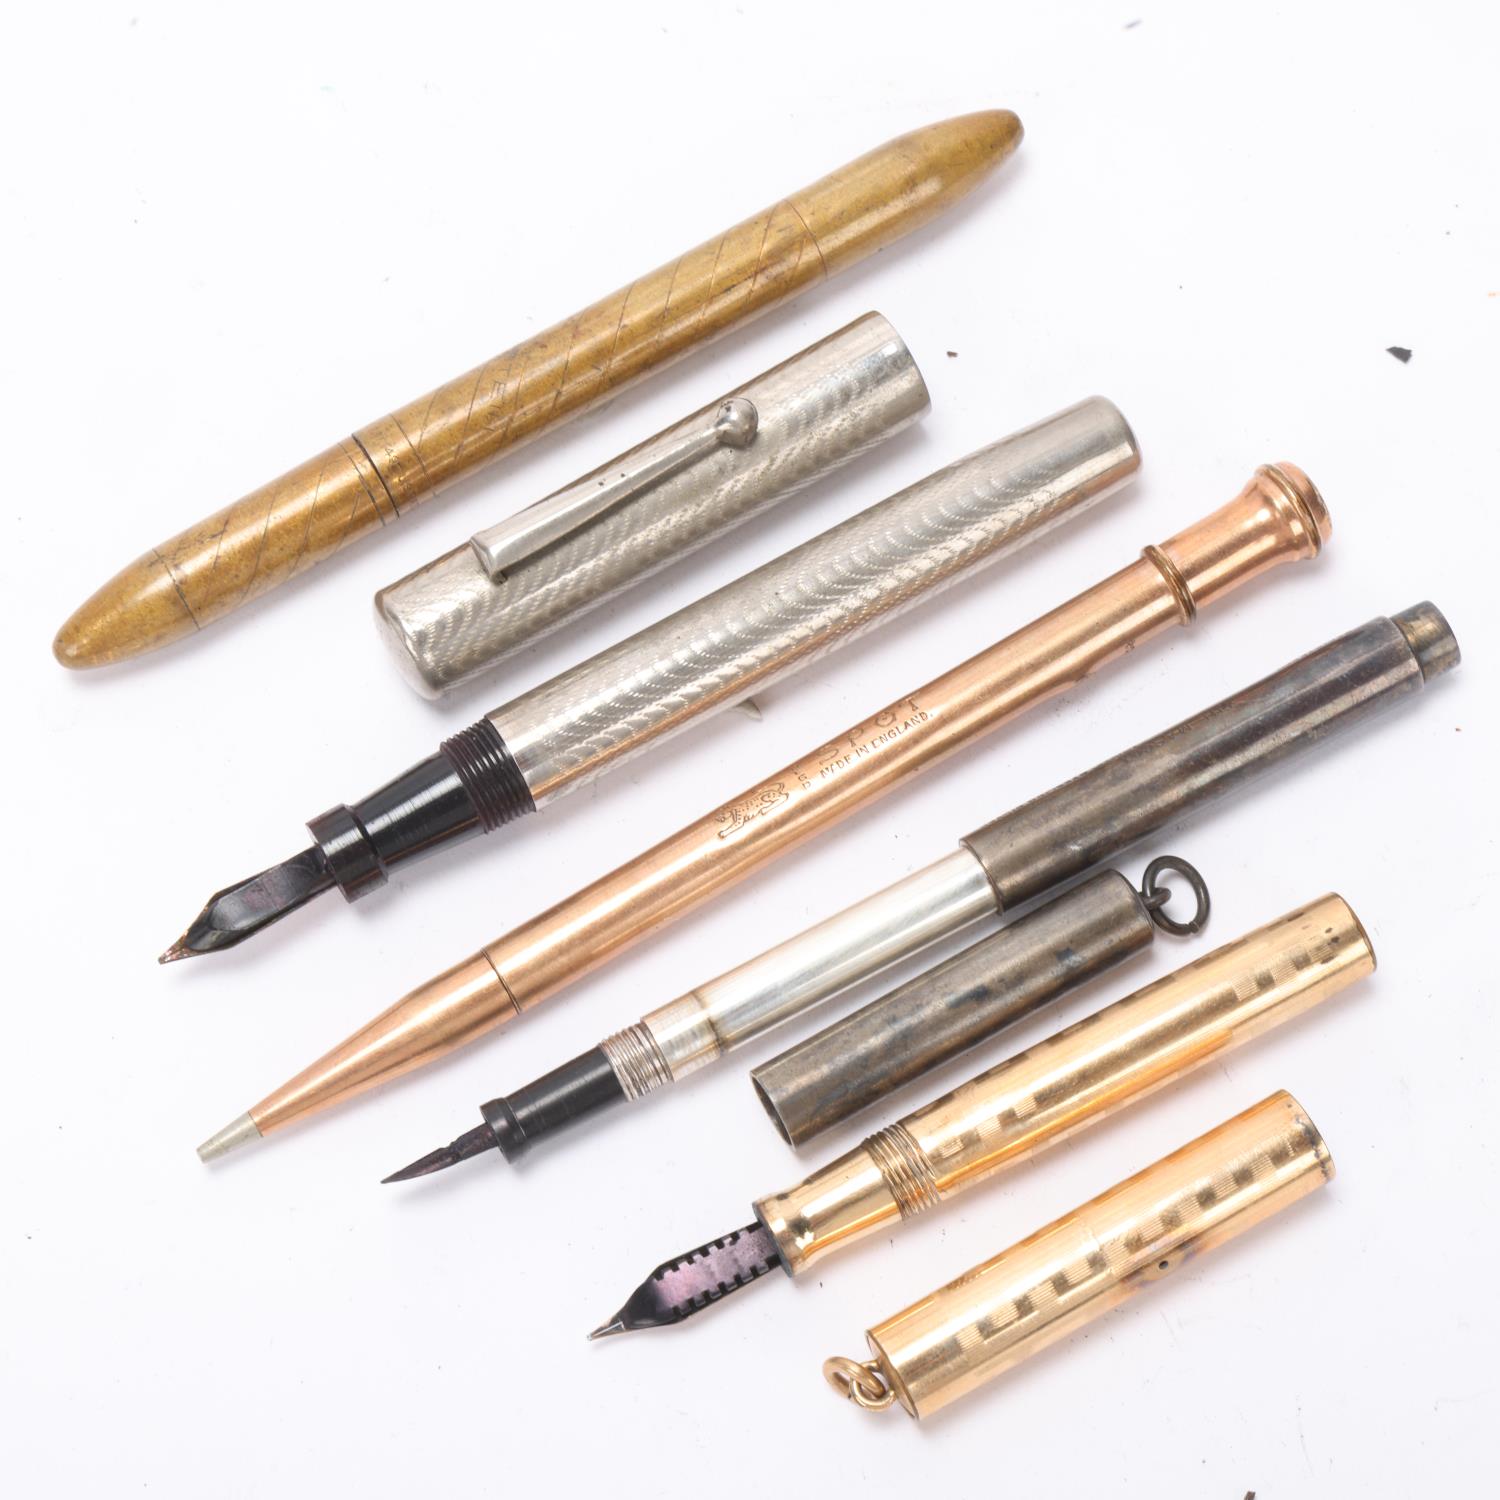 5 metal body antique fountain pens and pencils, one has Sterling silver body A/F, - Image 3 of 4